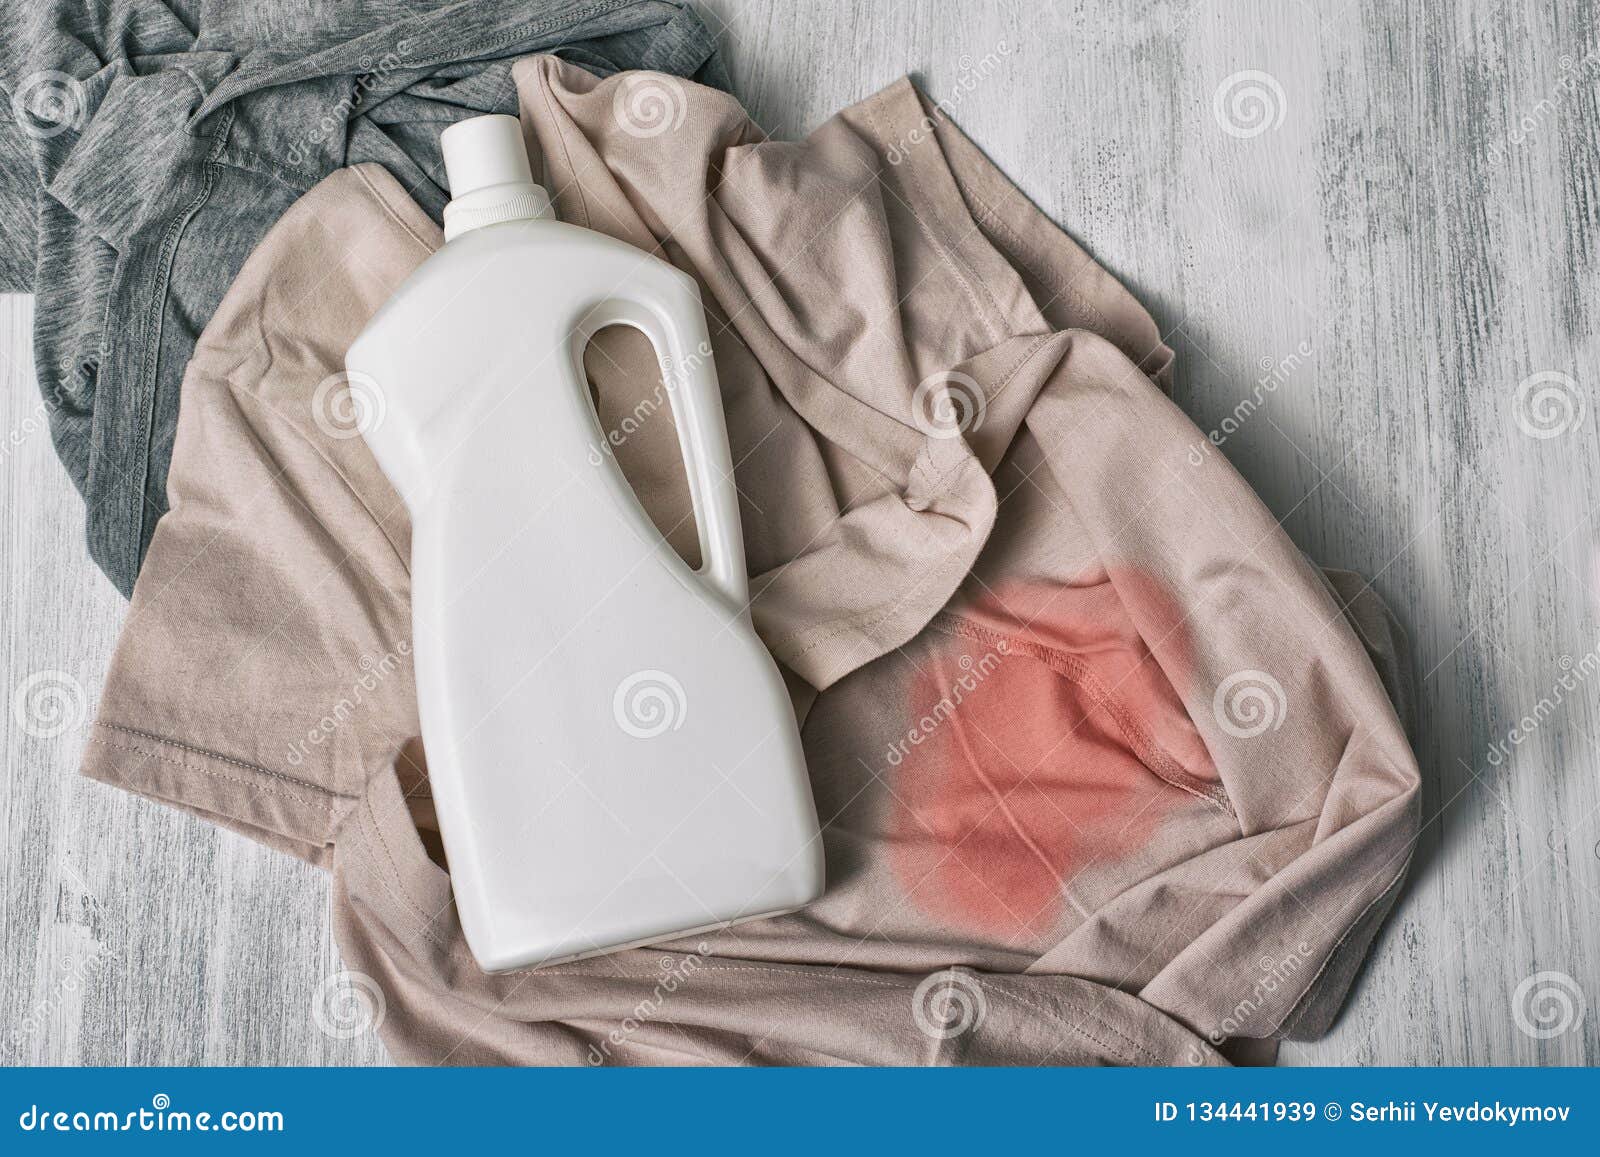 clothes with stains and a bottle of detergent. top view